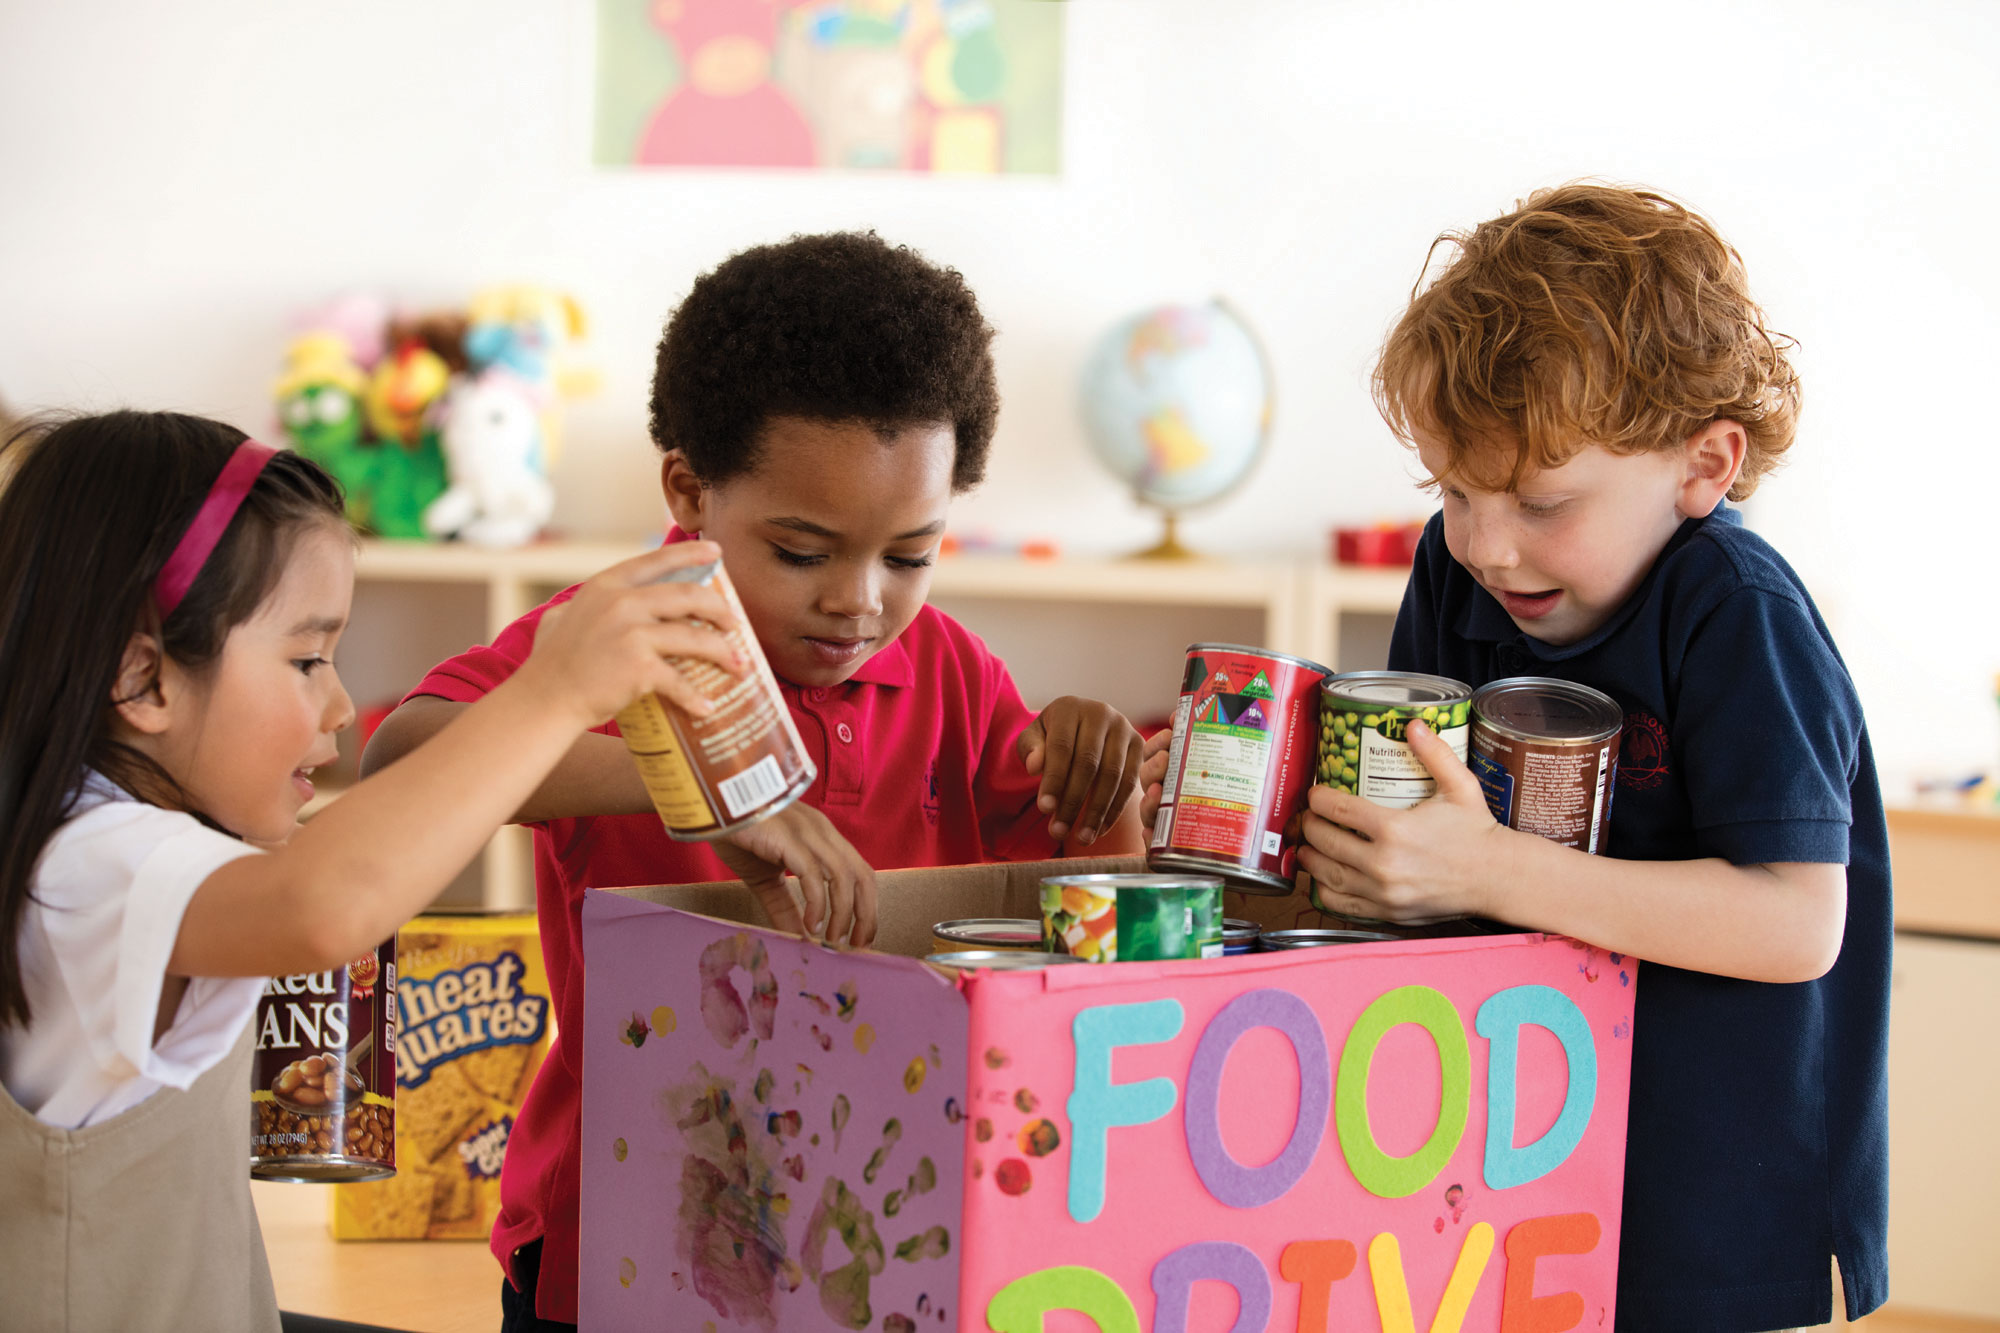 Primrose schools hosts a Caring and Giving Food Drive every year to reinforce an others-centered mindset. 